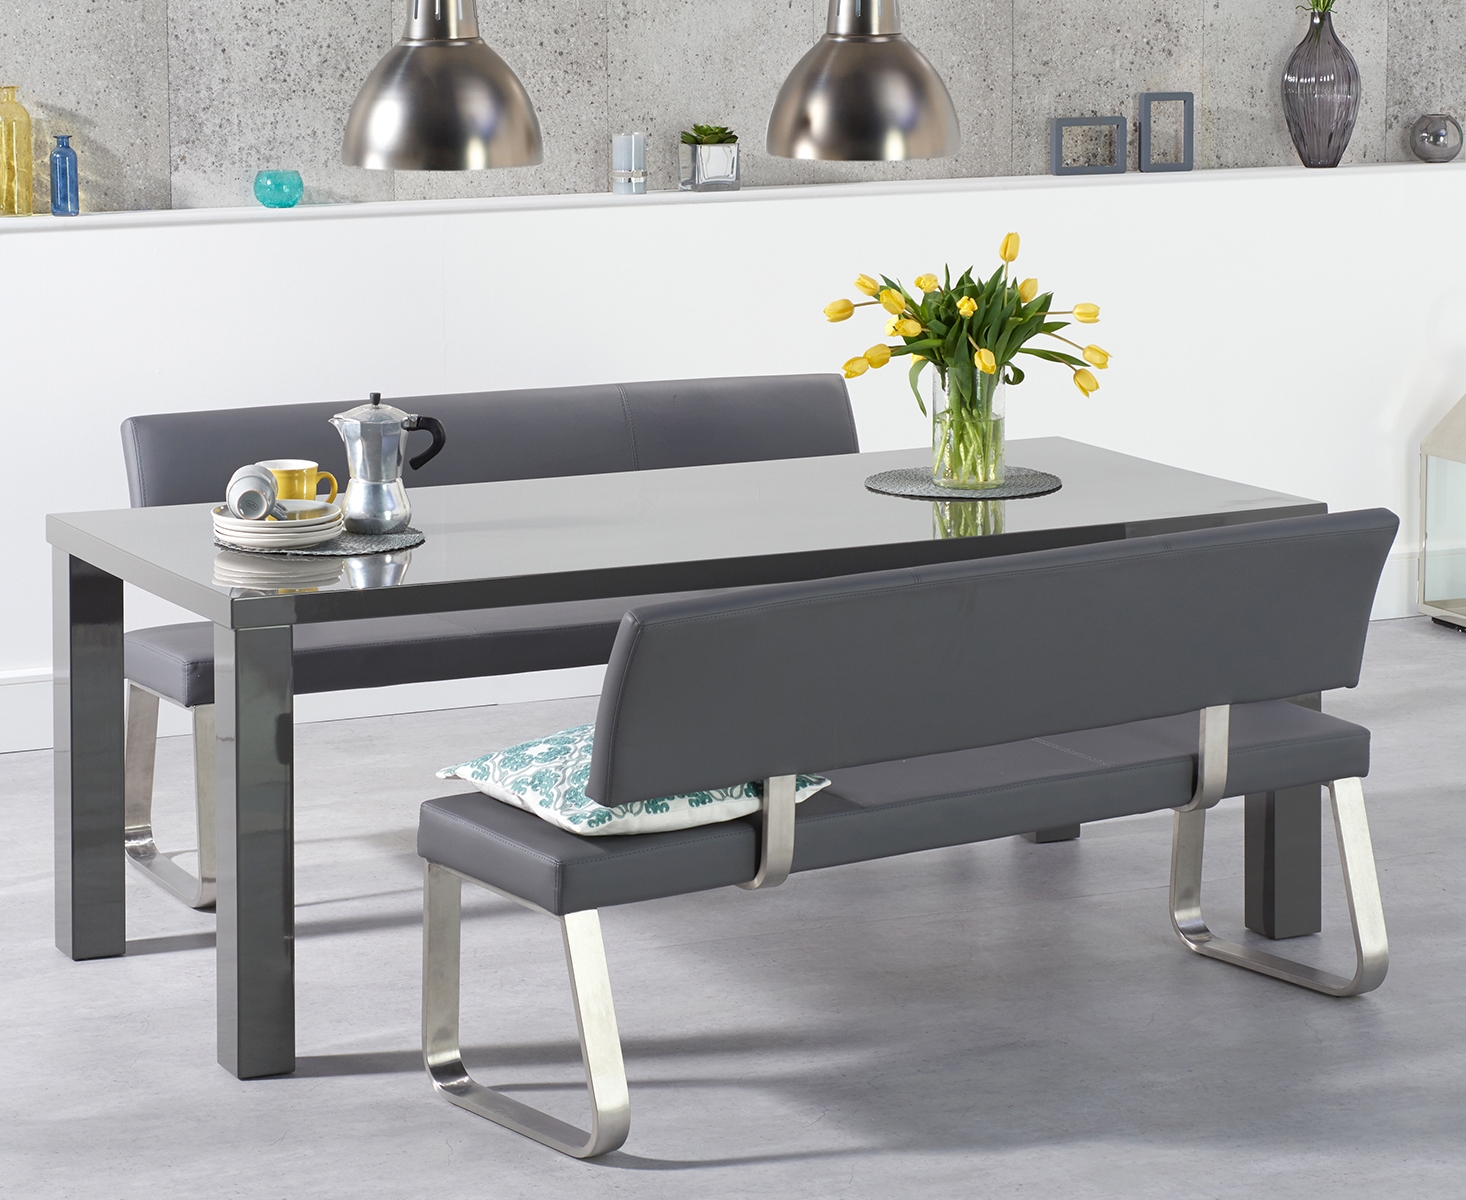 Atlanta 200cm Dark Grey High Gloss Dining Table With Austin Benches With Backs